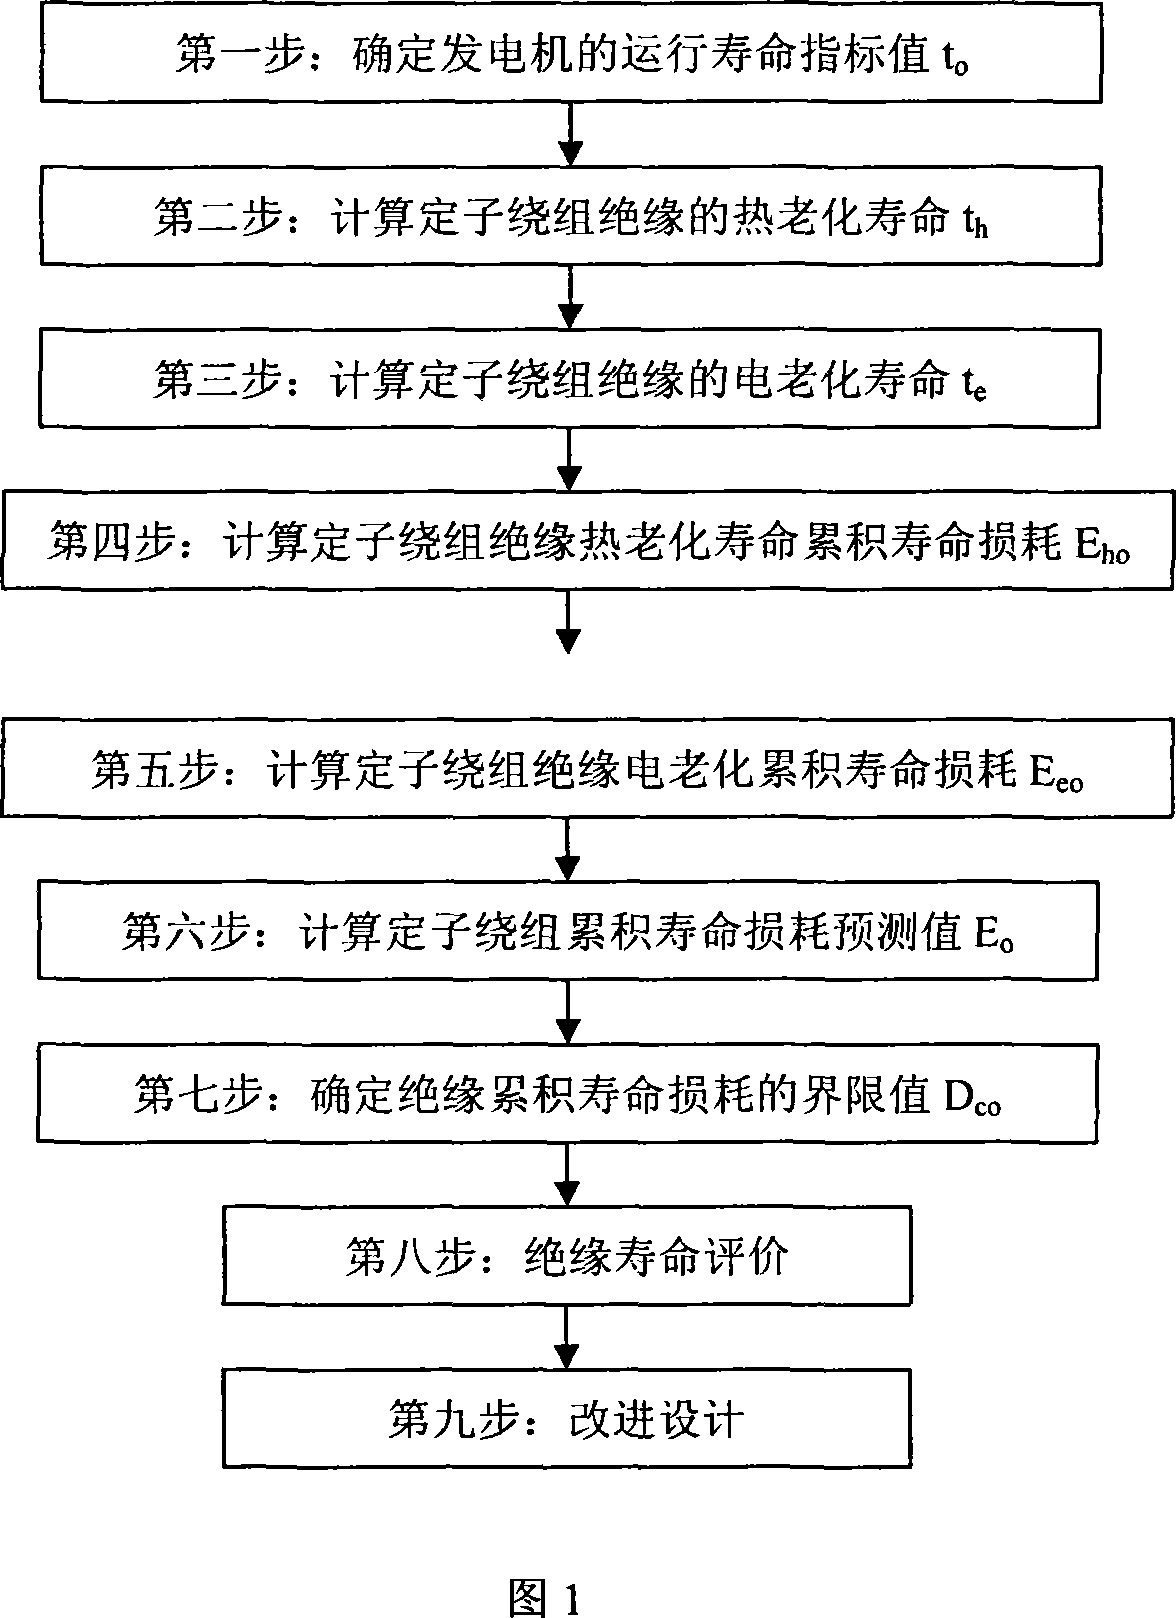 Design method for insulation service life of turbine generator stator winding and its appraising method